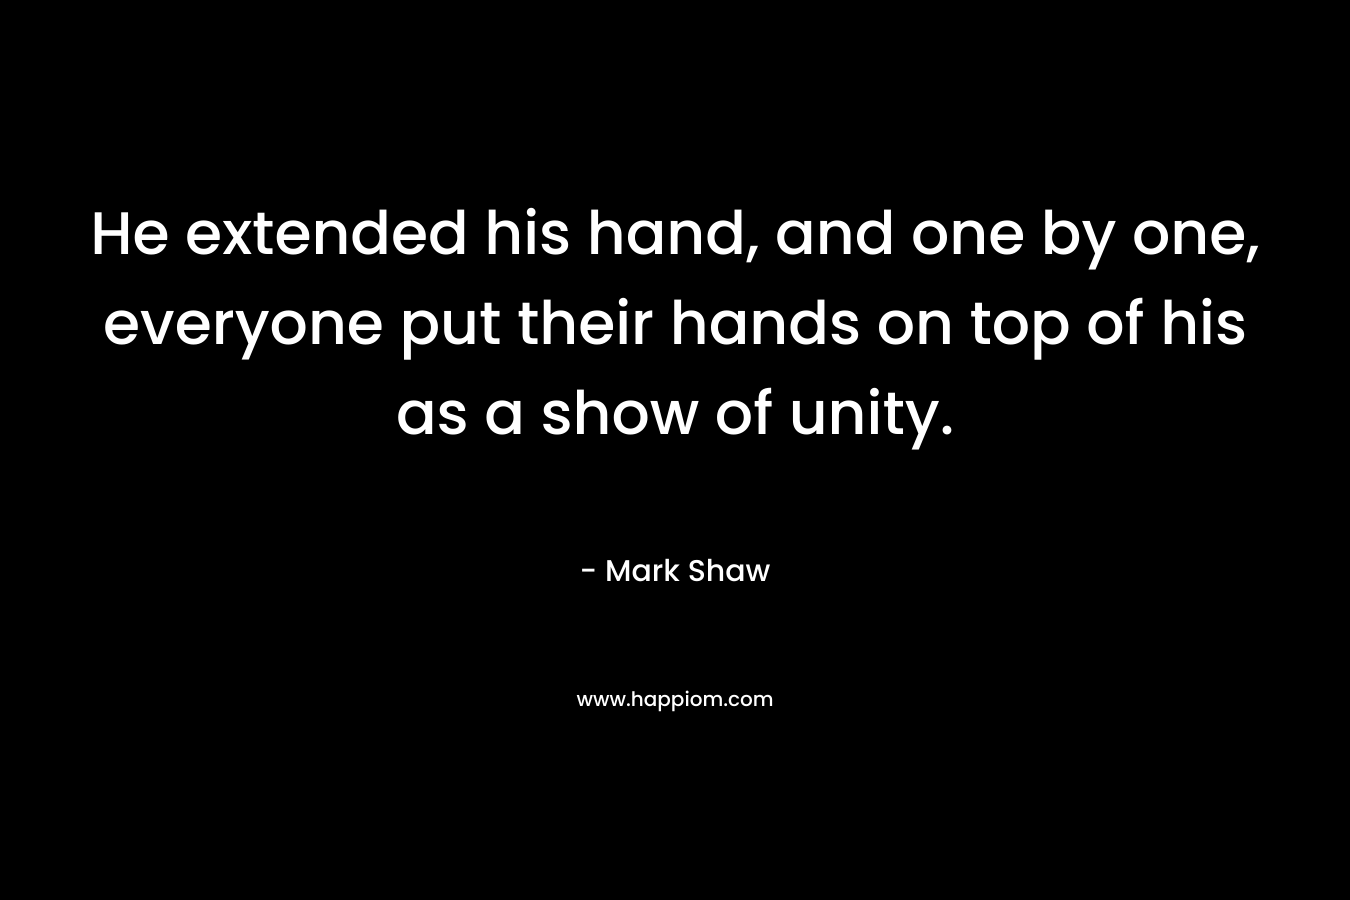 He extended his hand, and one by one, everyone put their hands on top of his as a show of unity. – Mark Shaw